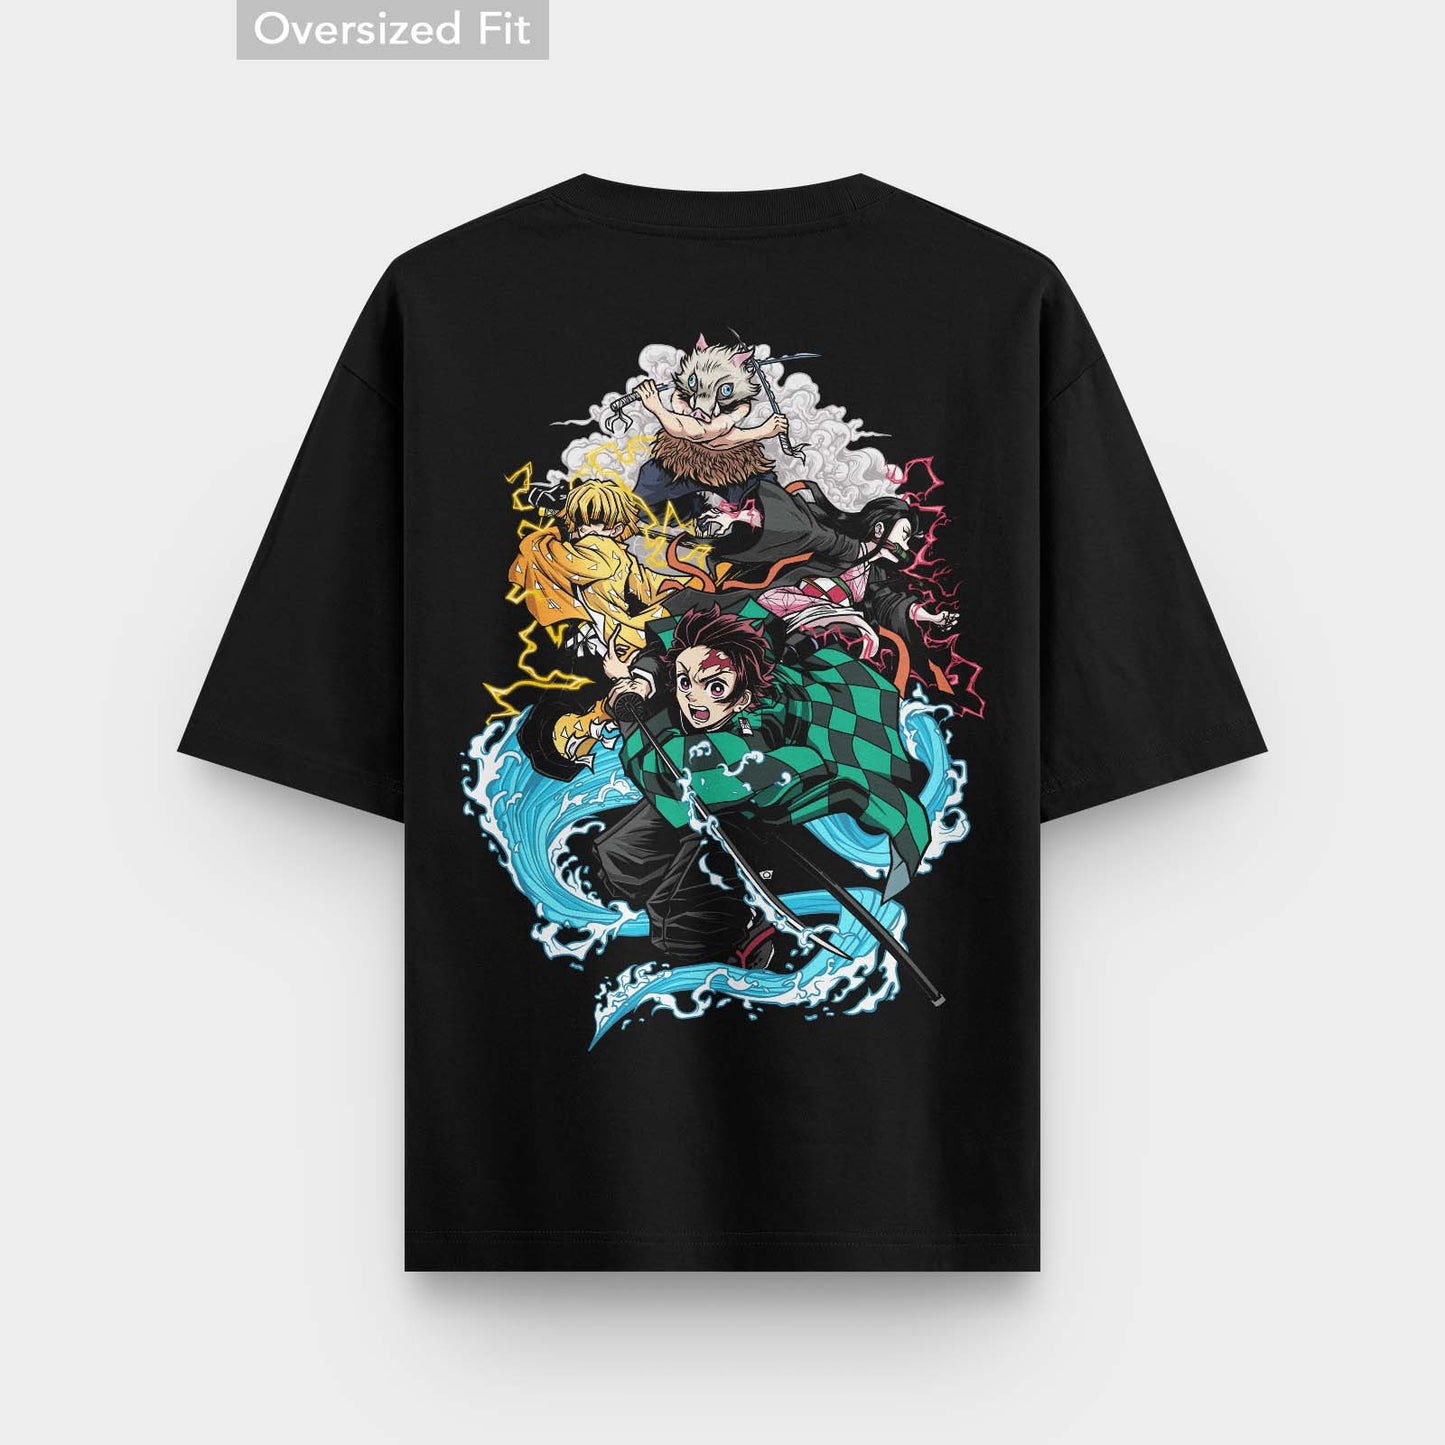 The image shows a black t-shirt with an oversized fit. The shirt features a colorful graphic print on the back depicting characters from the anime series "Demon Slayer." The characters depicted include Tanjiro Kamado in a dynamic pose at the center, surrounded by other characters like Nezuko, Zenitsu, and Inosuke, along with some of the Hashiras. The design is vibrant and detailed, appealing to fans of the series.